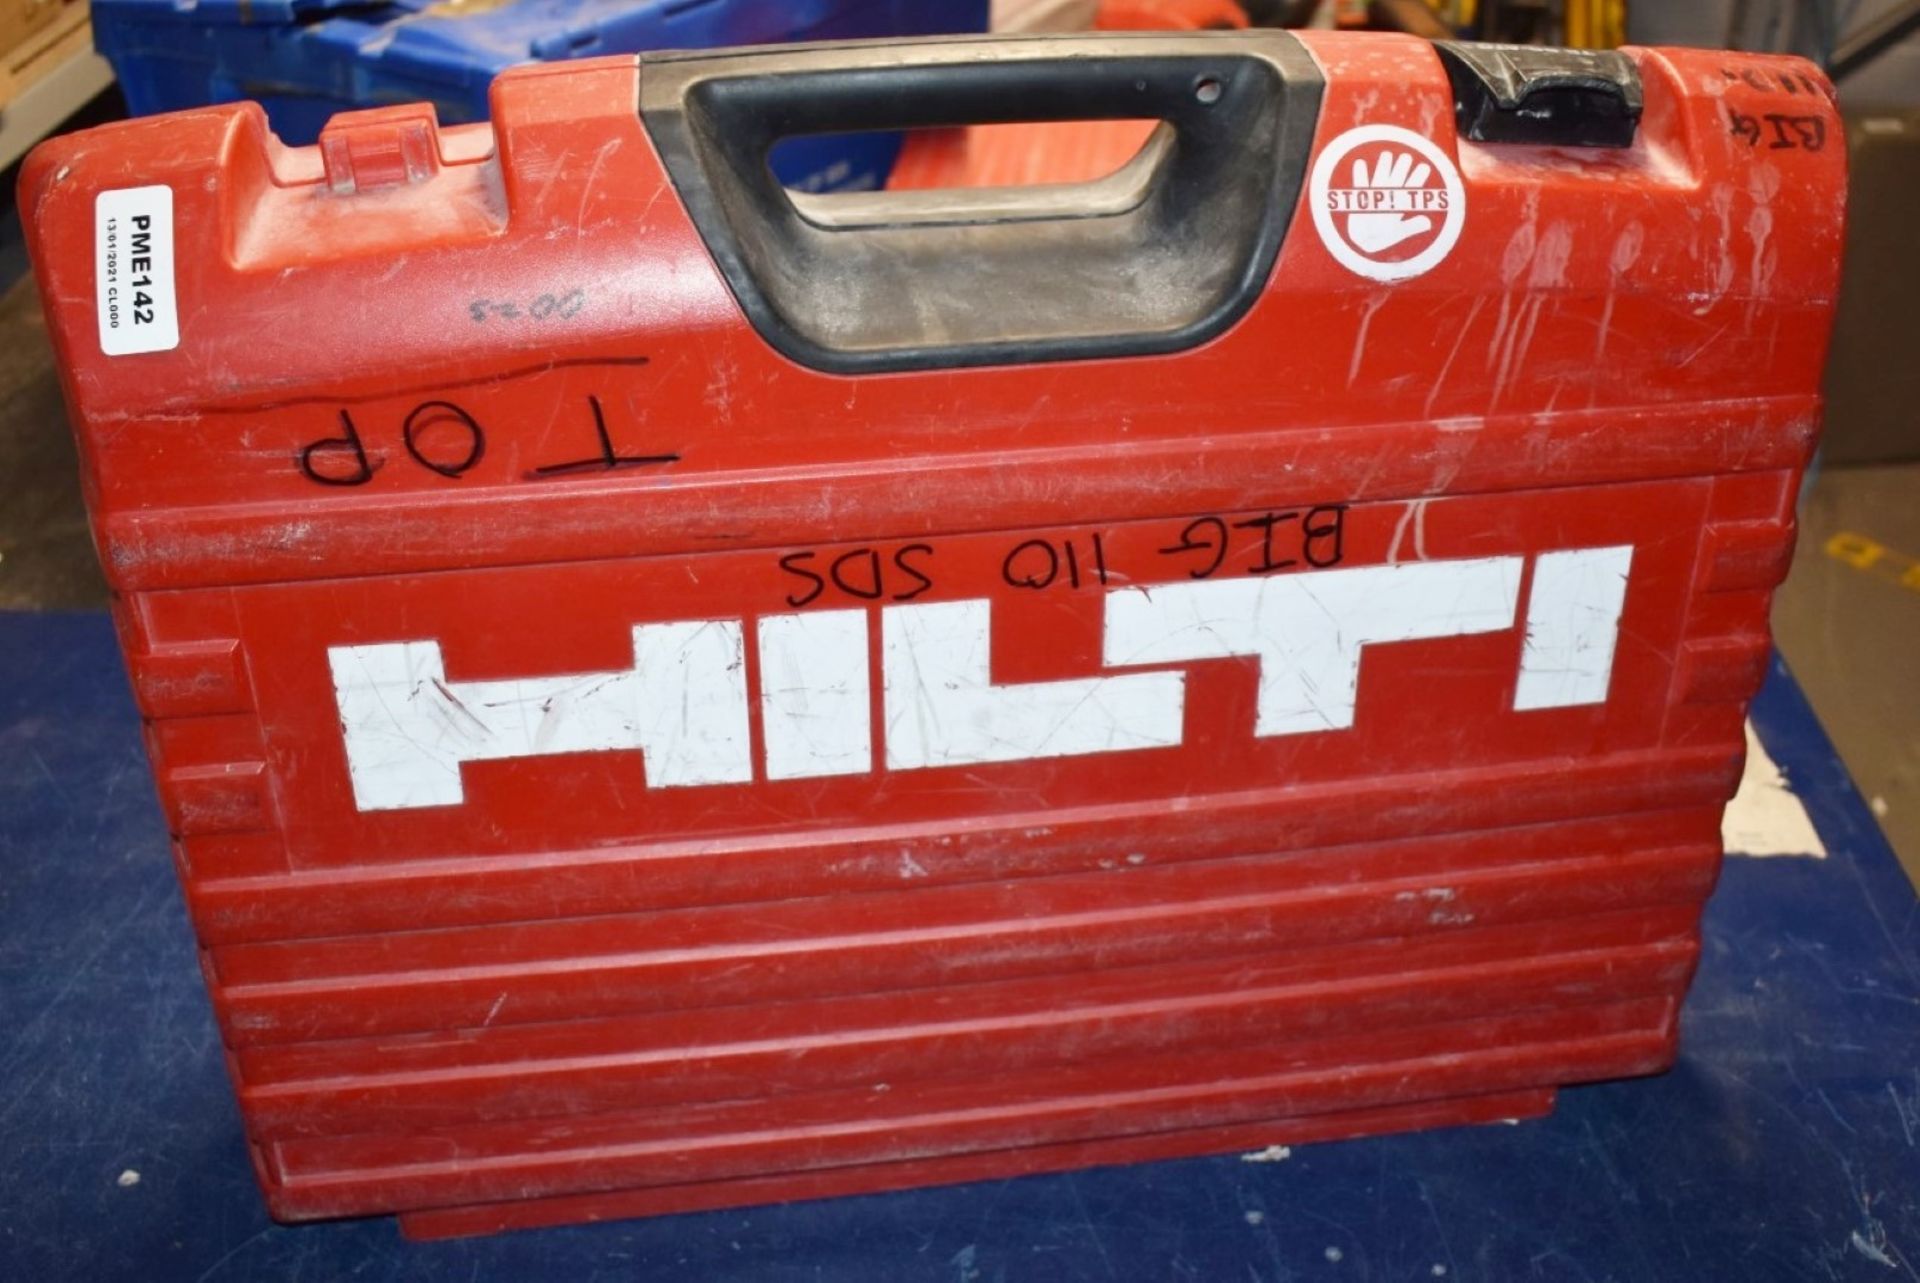 1 x Hilti TE56 110v Rotary Hammer Drill With Various Drill Bits and Carry Case PME142 - Image 2 of 7